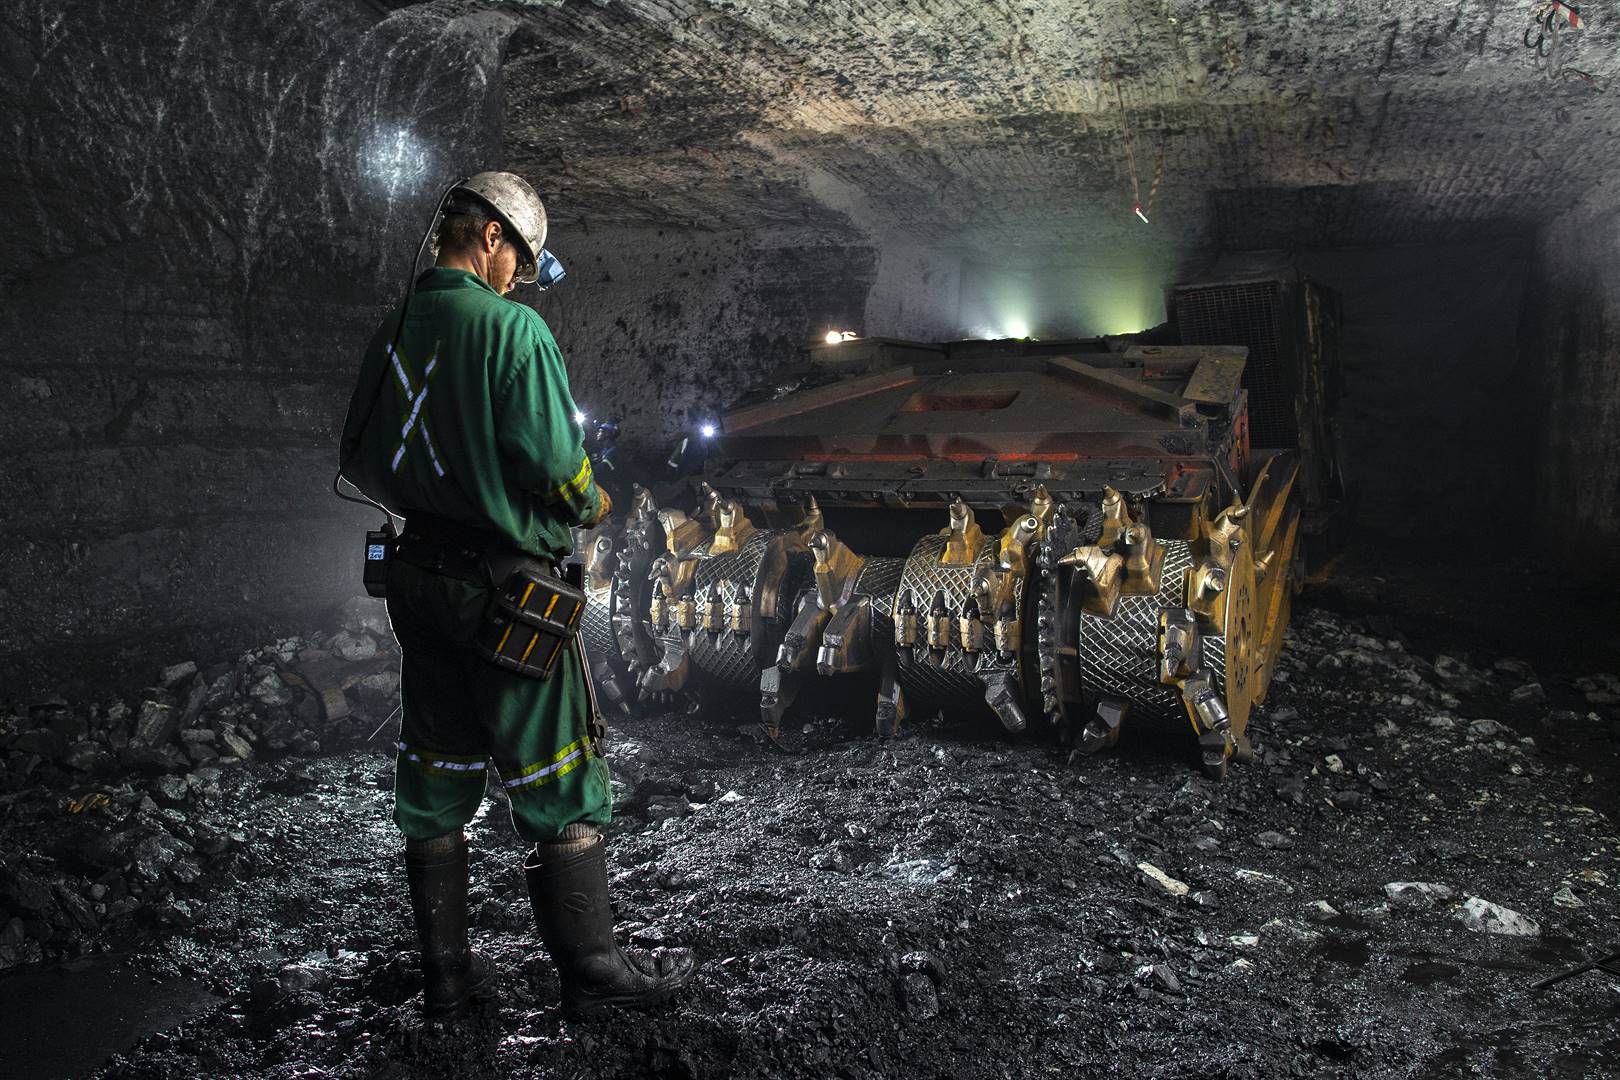 Workers at a Thungela mine.